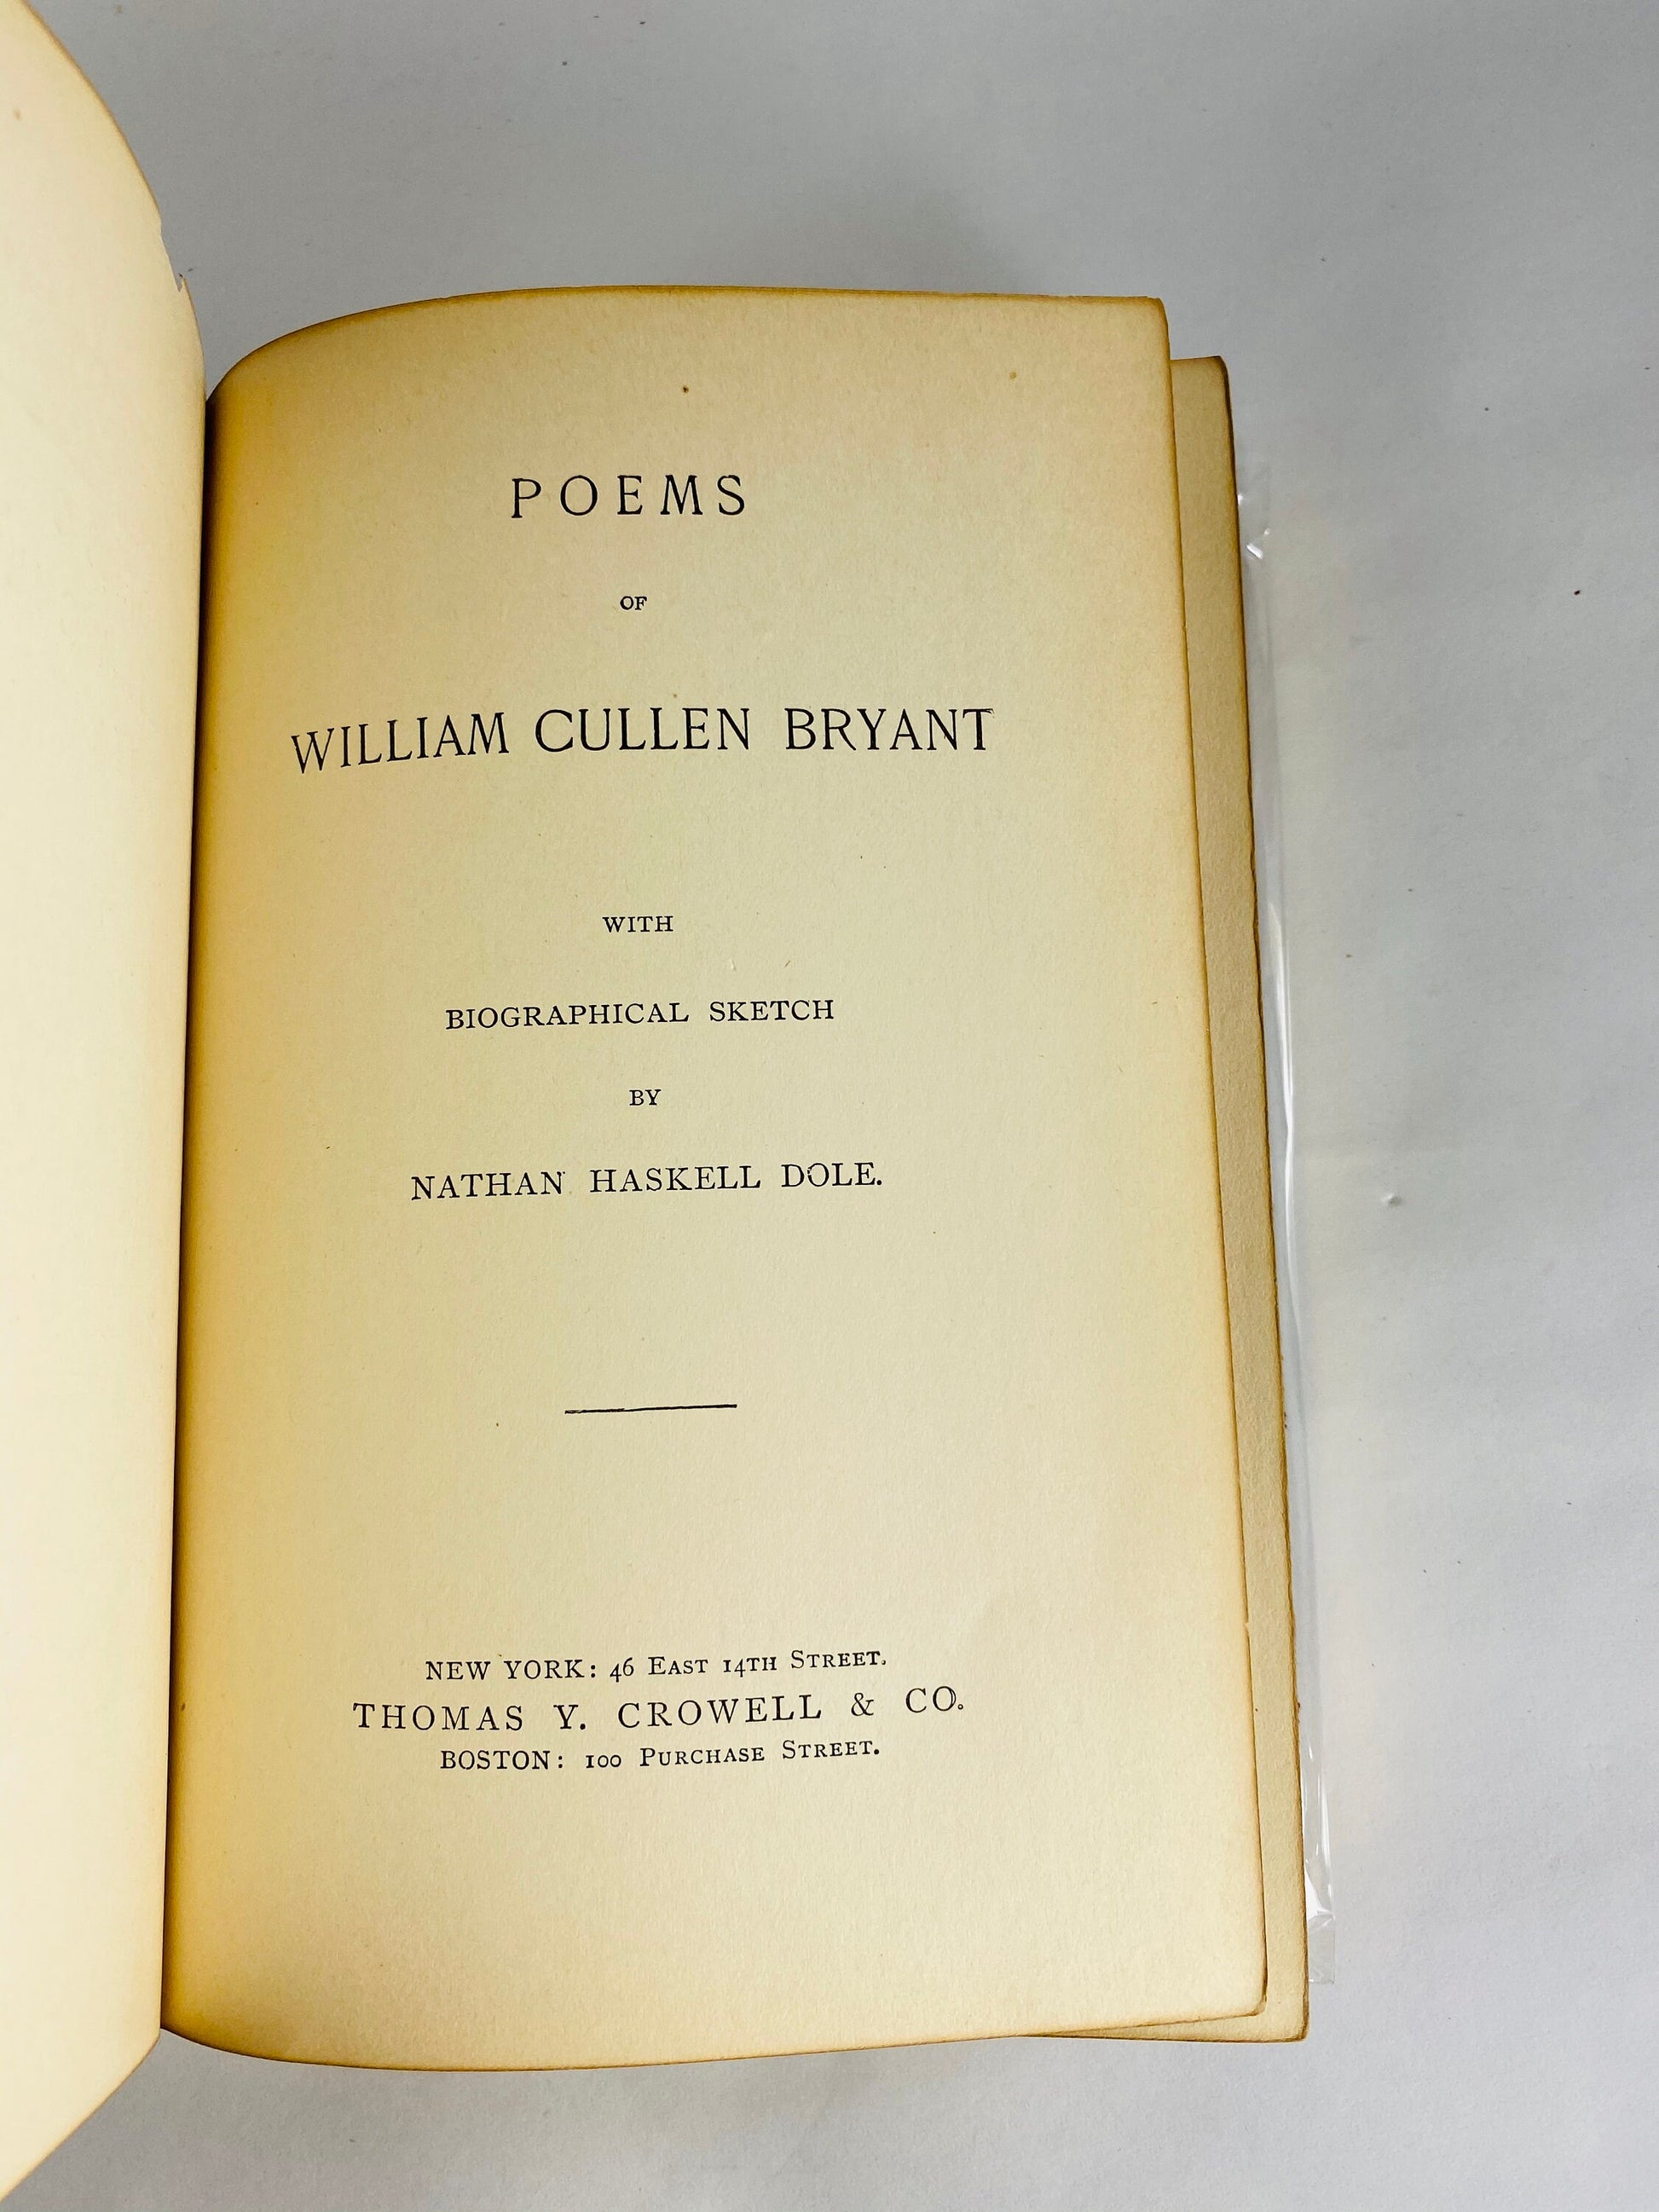 William Cullen Bryant FIRST EDITION book of poems circa 1893 Beautiful Antique Victorian Brown leather book gilded gold bookshelf home decor